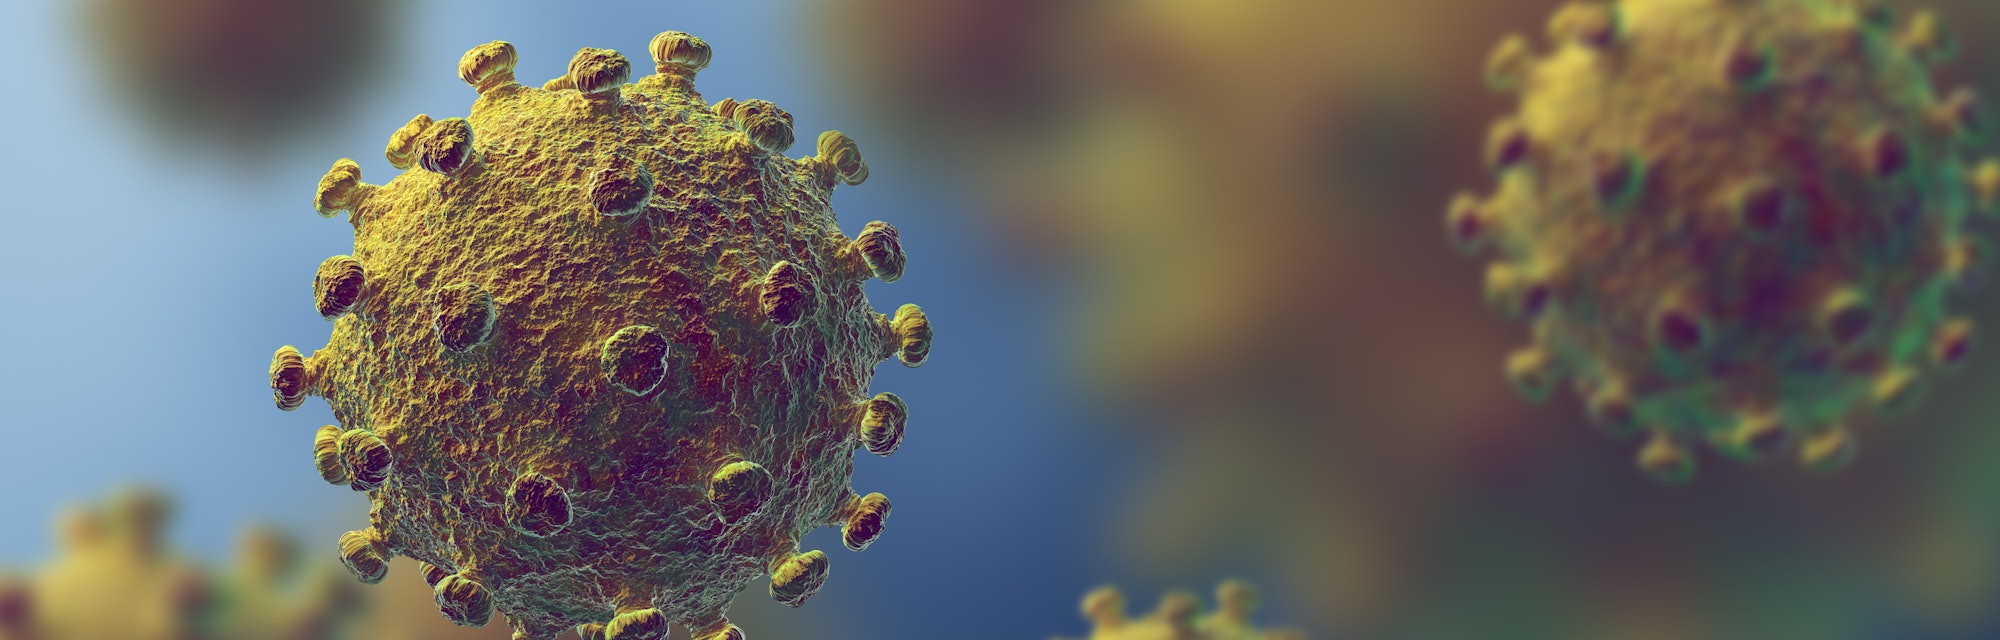 Flu or HIV coronavirus floating in fluid microscopic view, pandemic or virus infection concept - 3D ...